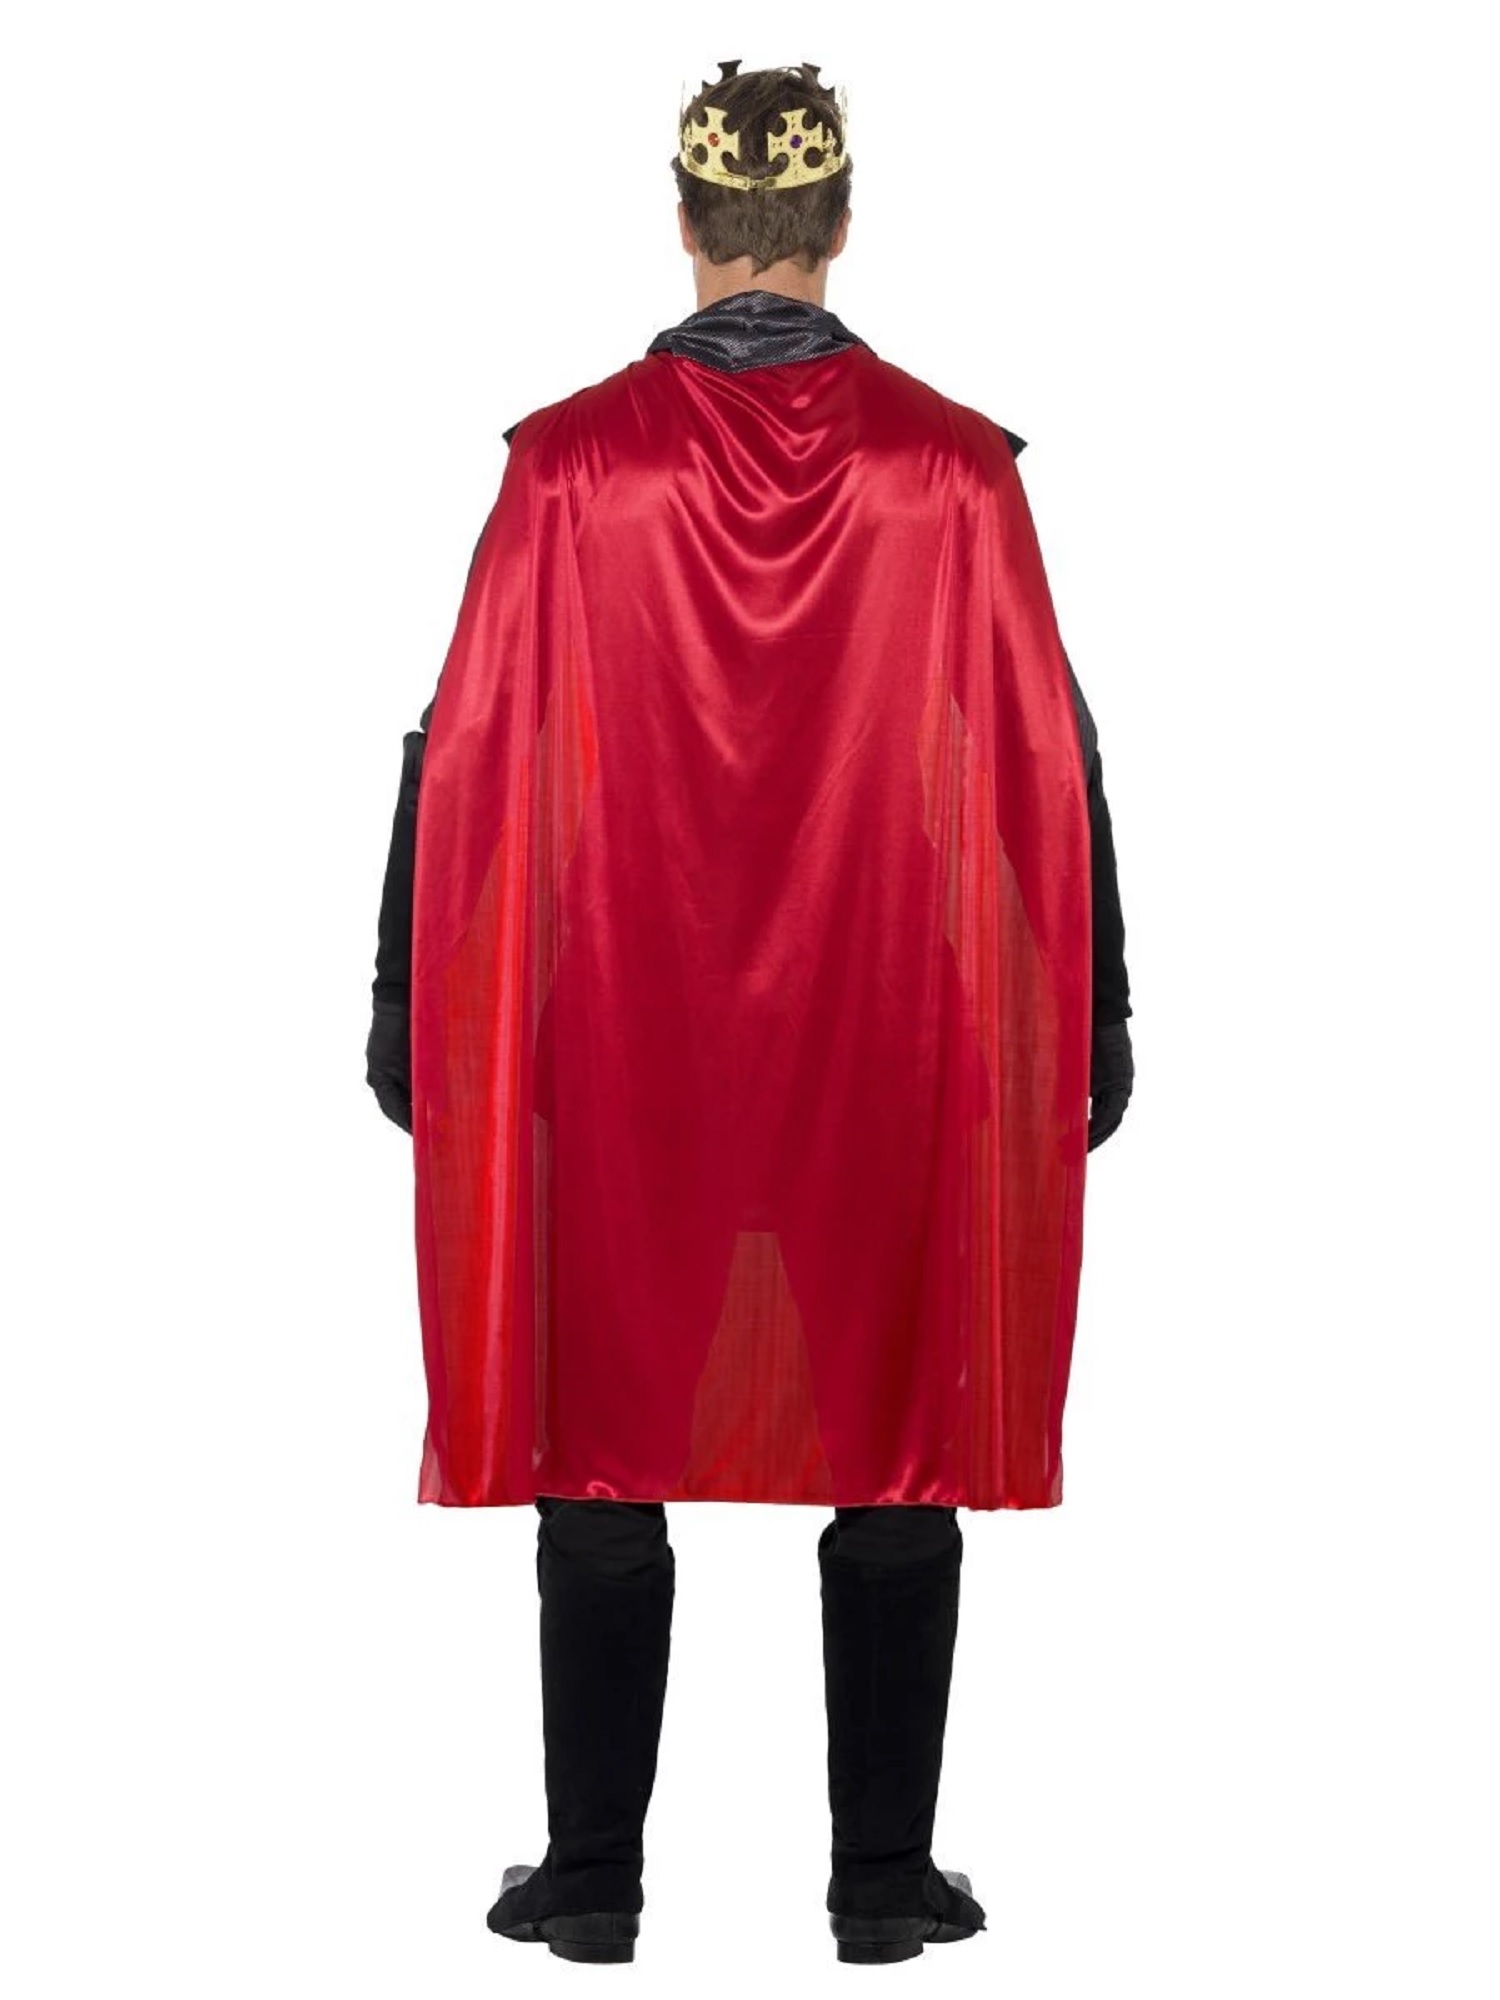 Smiffys 40" Black and Red King Arthur Deluxe Men Adult Halloween Costume - Large